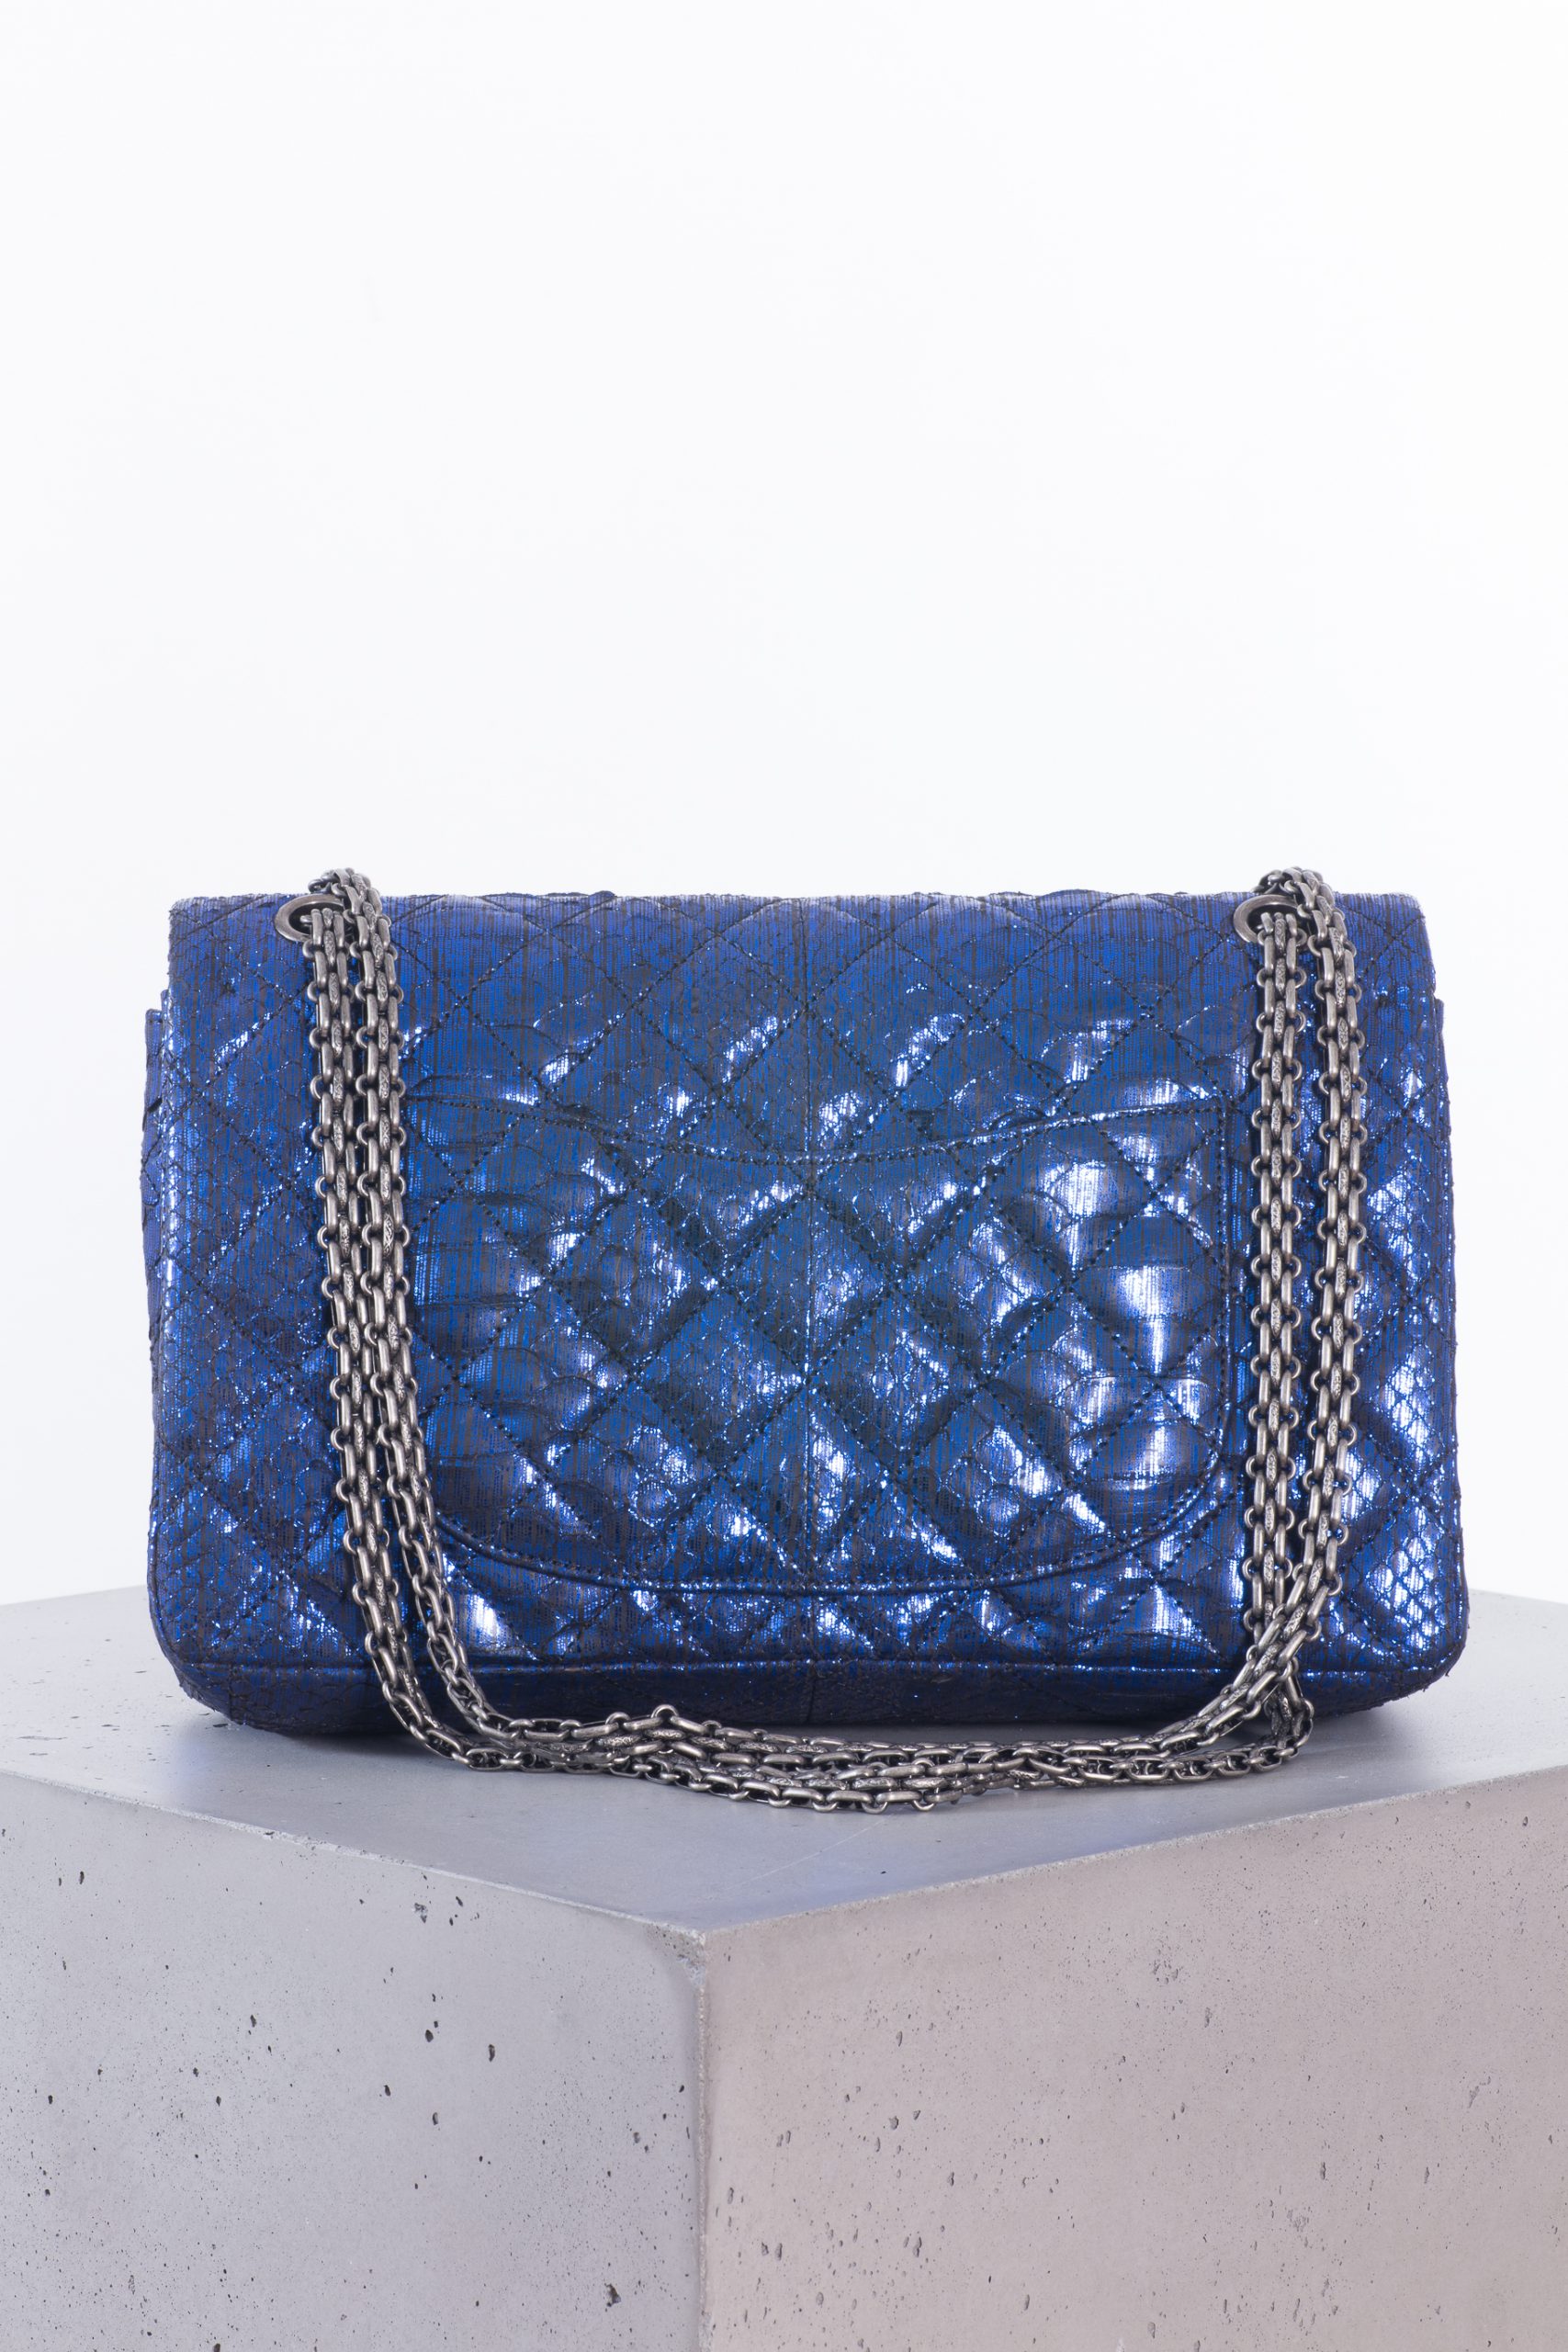 Chanel Outlet & Consignment Online Store - Huntessa